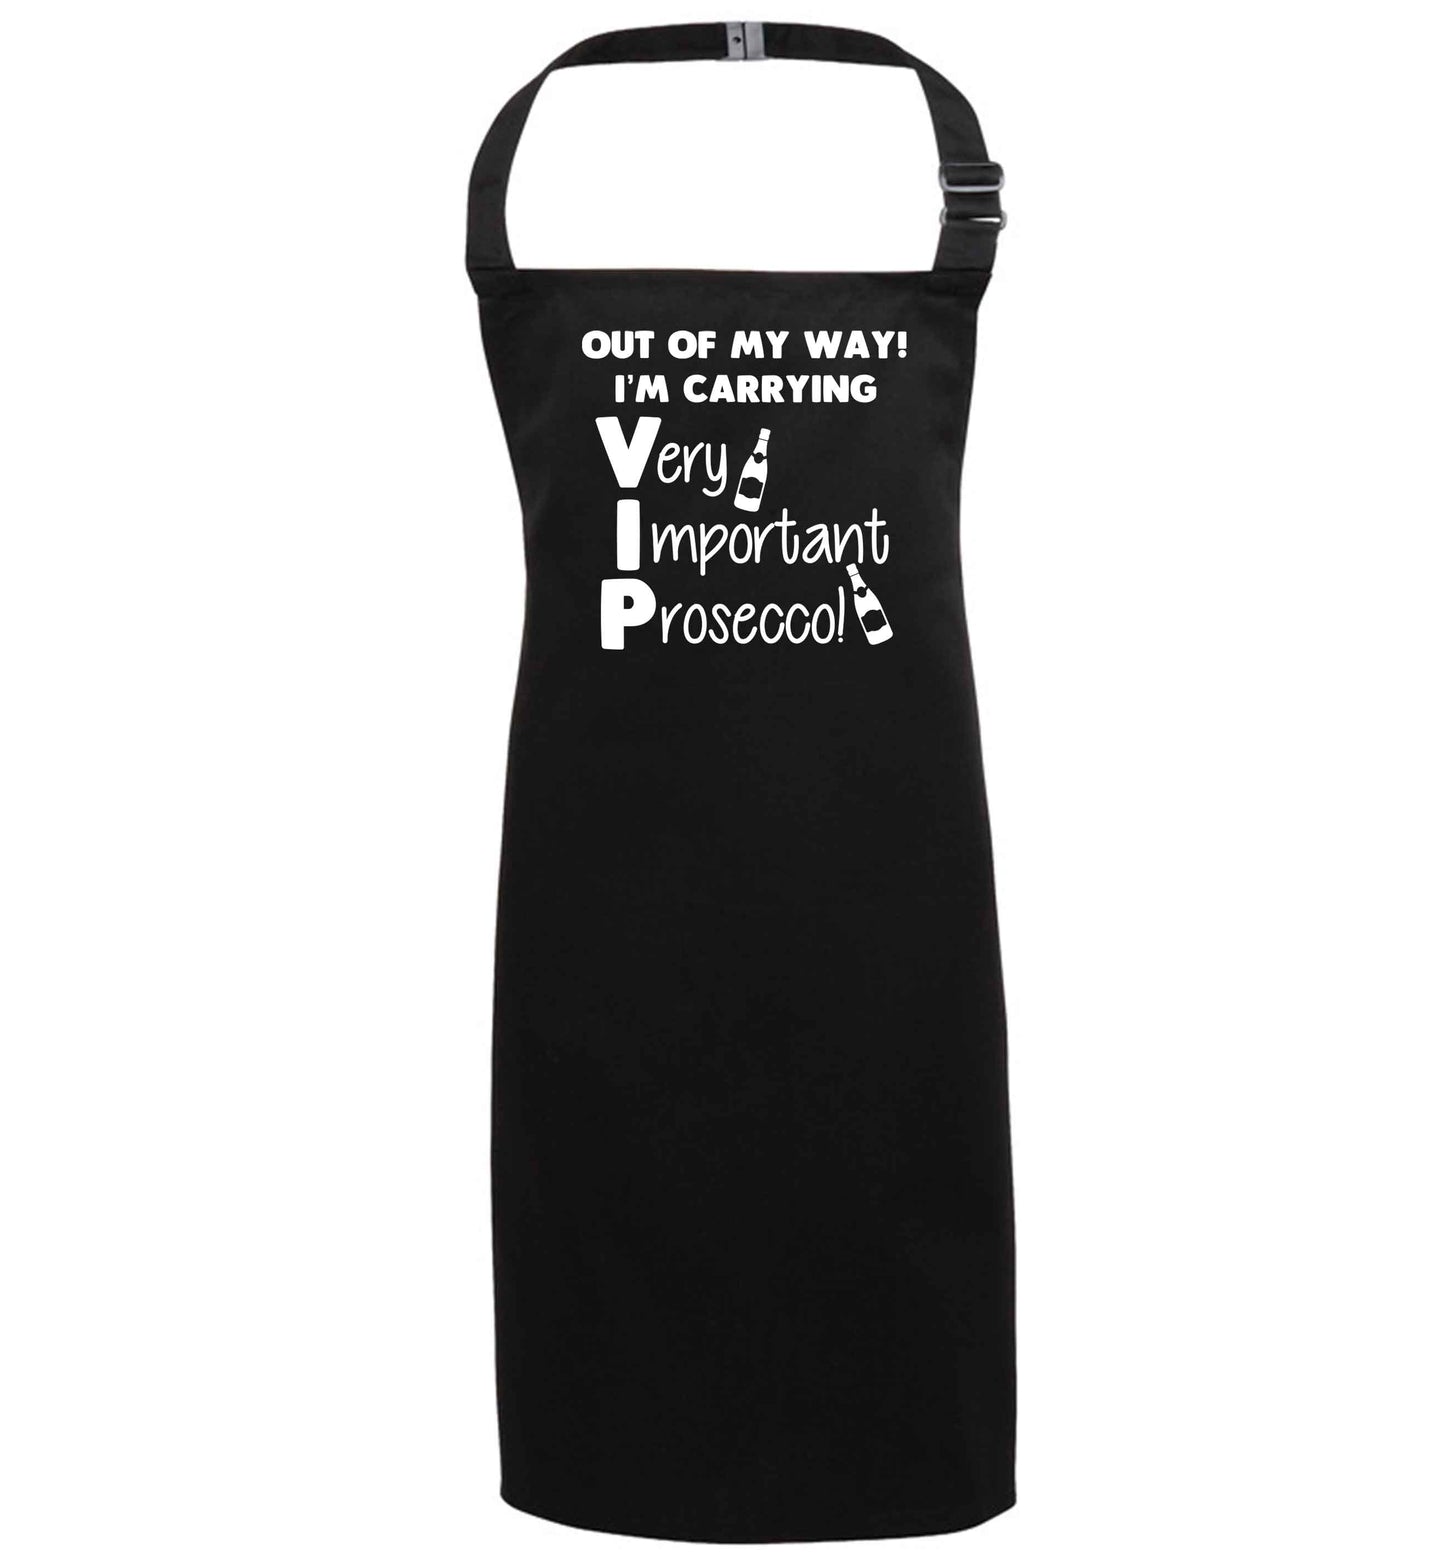 Out of my way I'm carrying very important prosecco! black apron 7-10 years